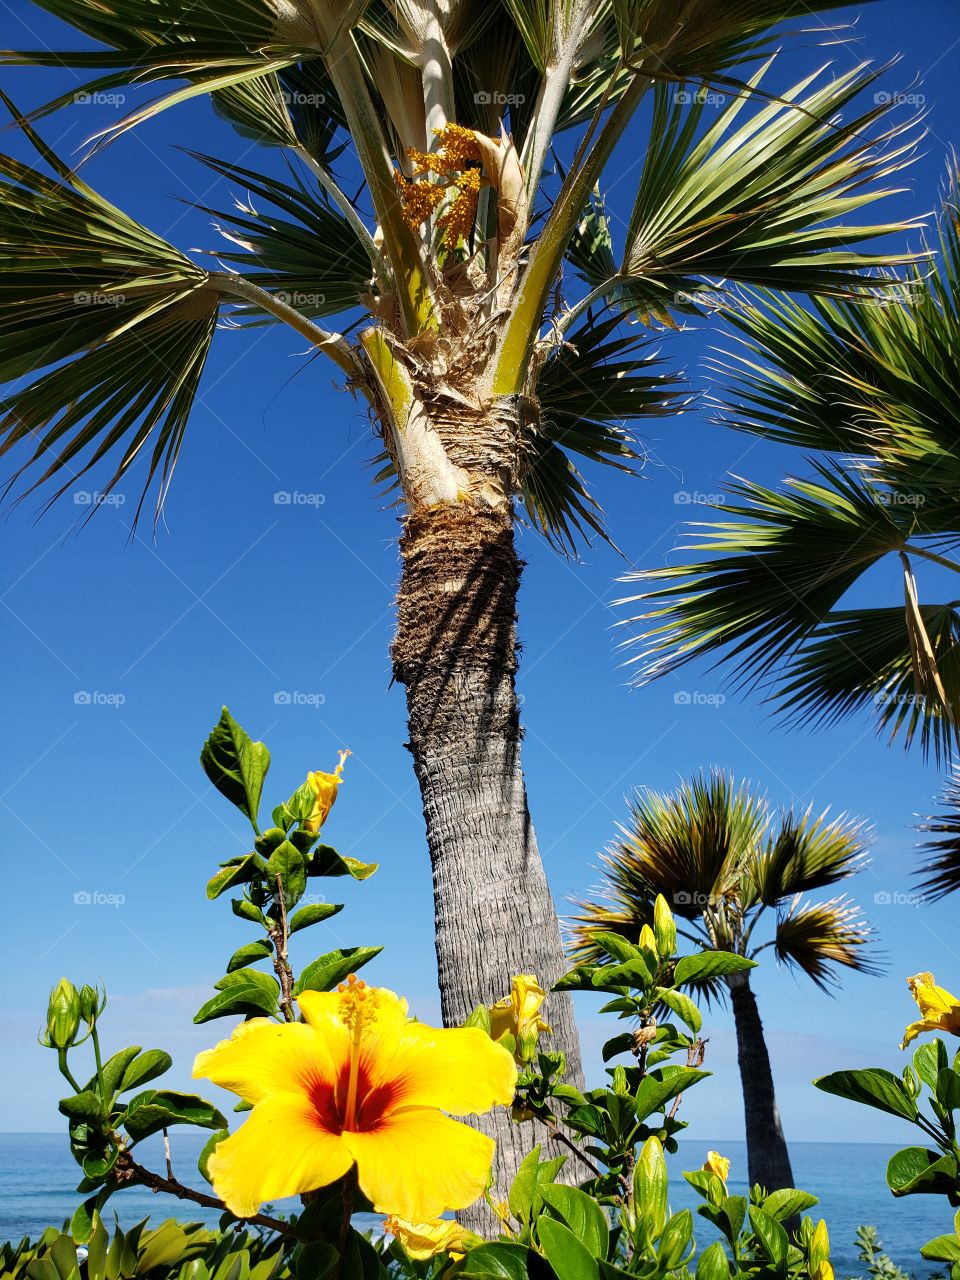 hibiscus and palm tree